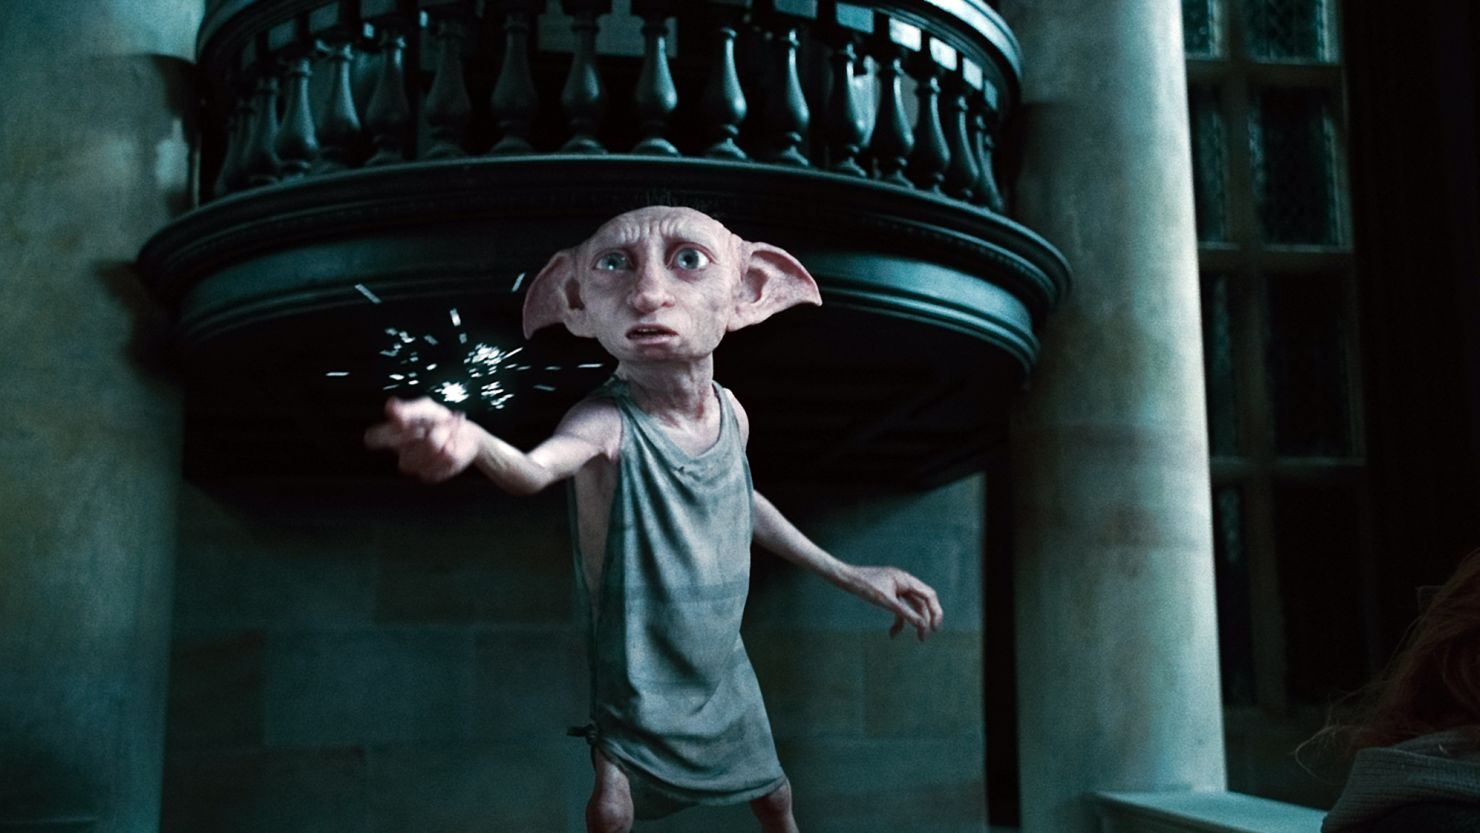 Dobby, a house elf, features prominently in "Harry Potter and the Deathly Hallows: Part 1." His death is widely considered one of the most emotional and tragic scenes in the series -- and inspired the creation of a grave on the beach where the scene was shot in Wales.